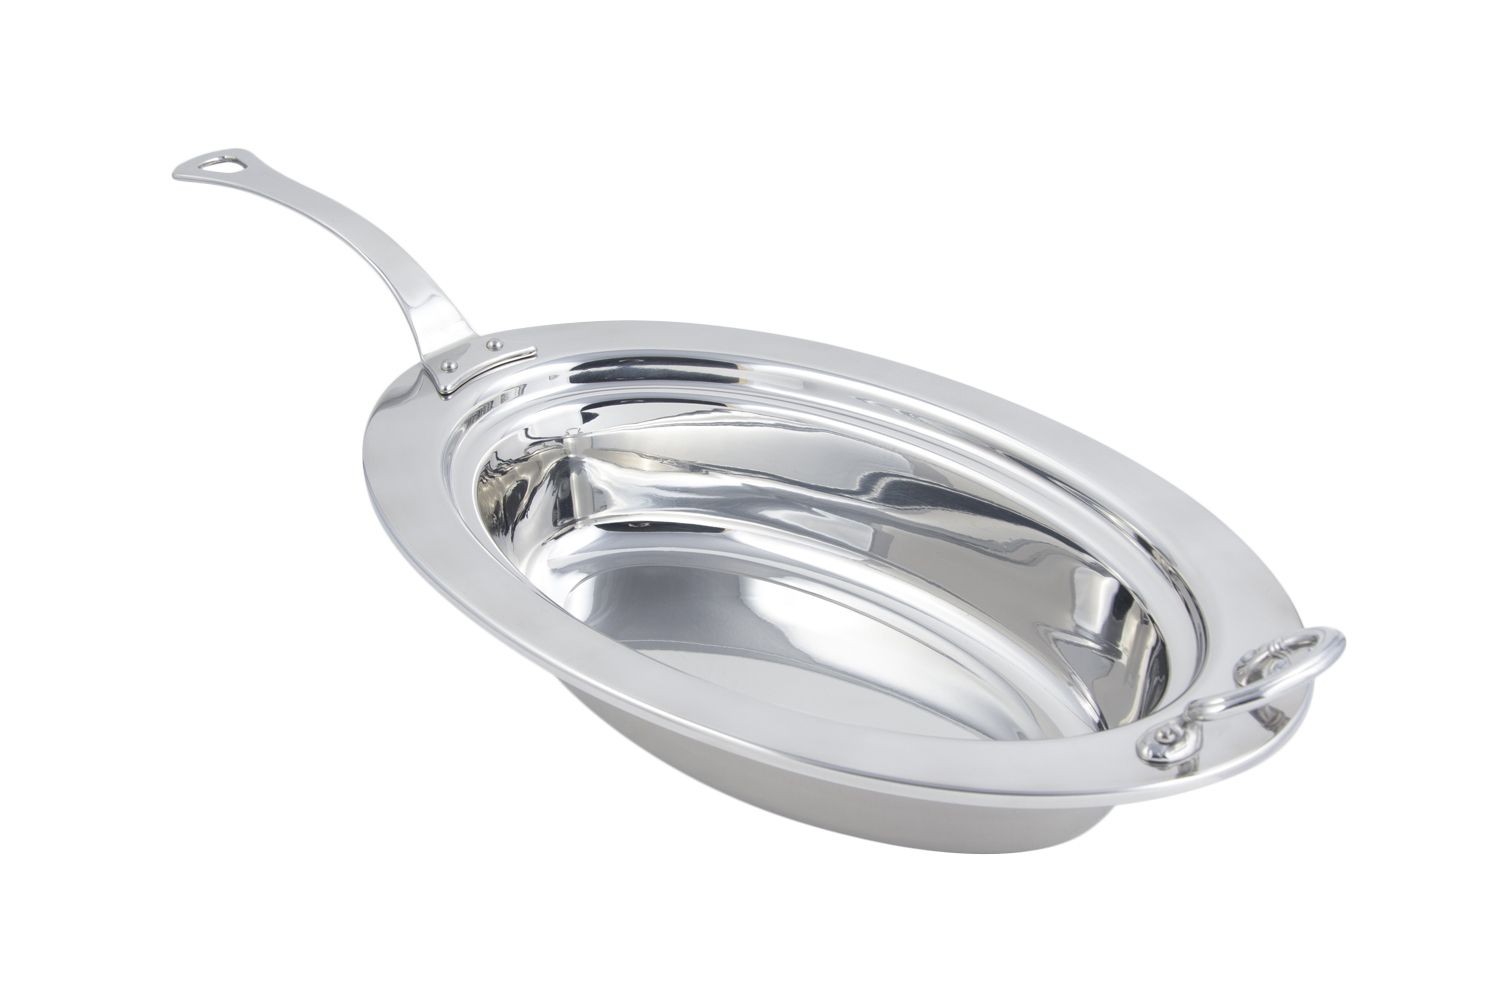 Bon Chef 5299HLSS Plain Design Oval Pan with Long Stainless Steel Handle, 6 Qt.